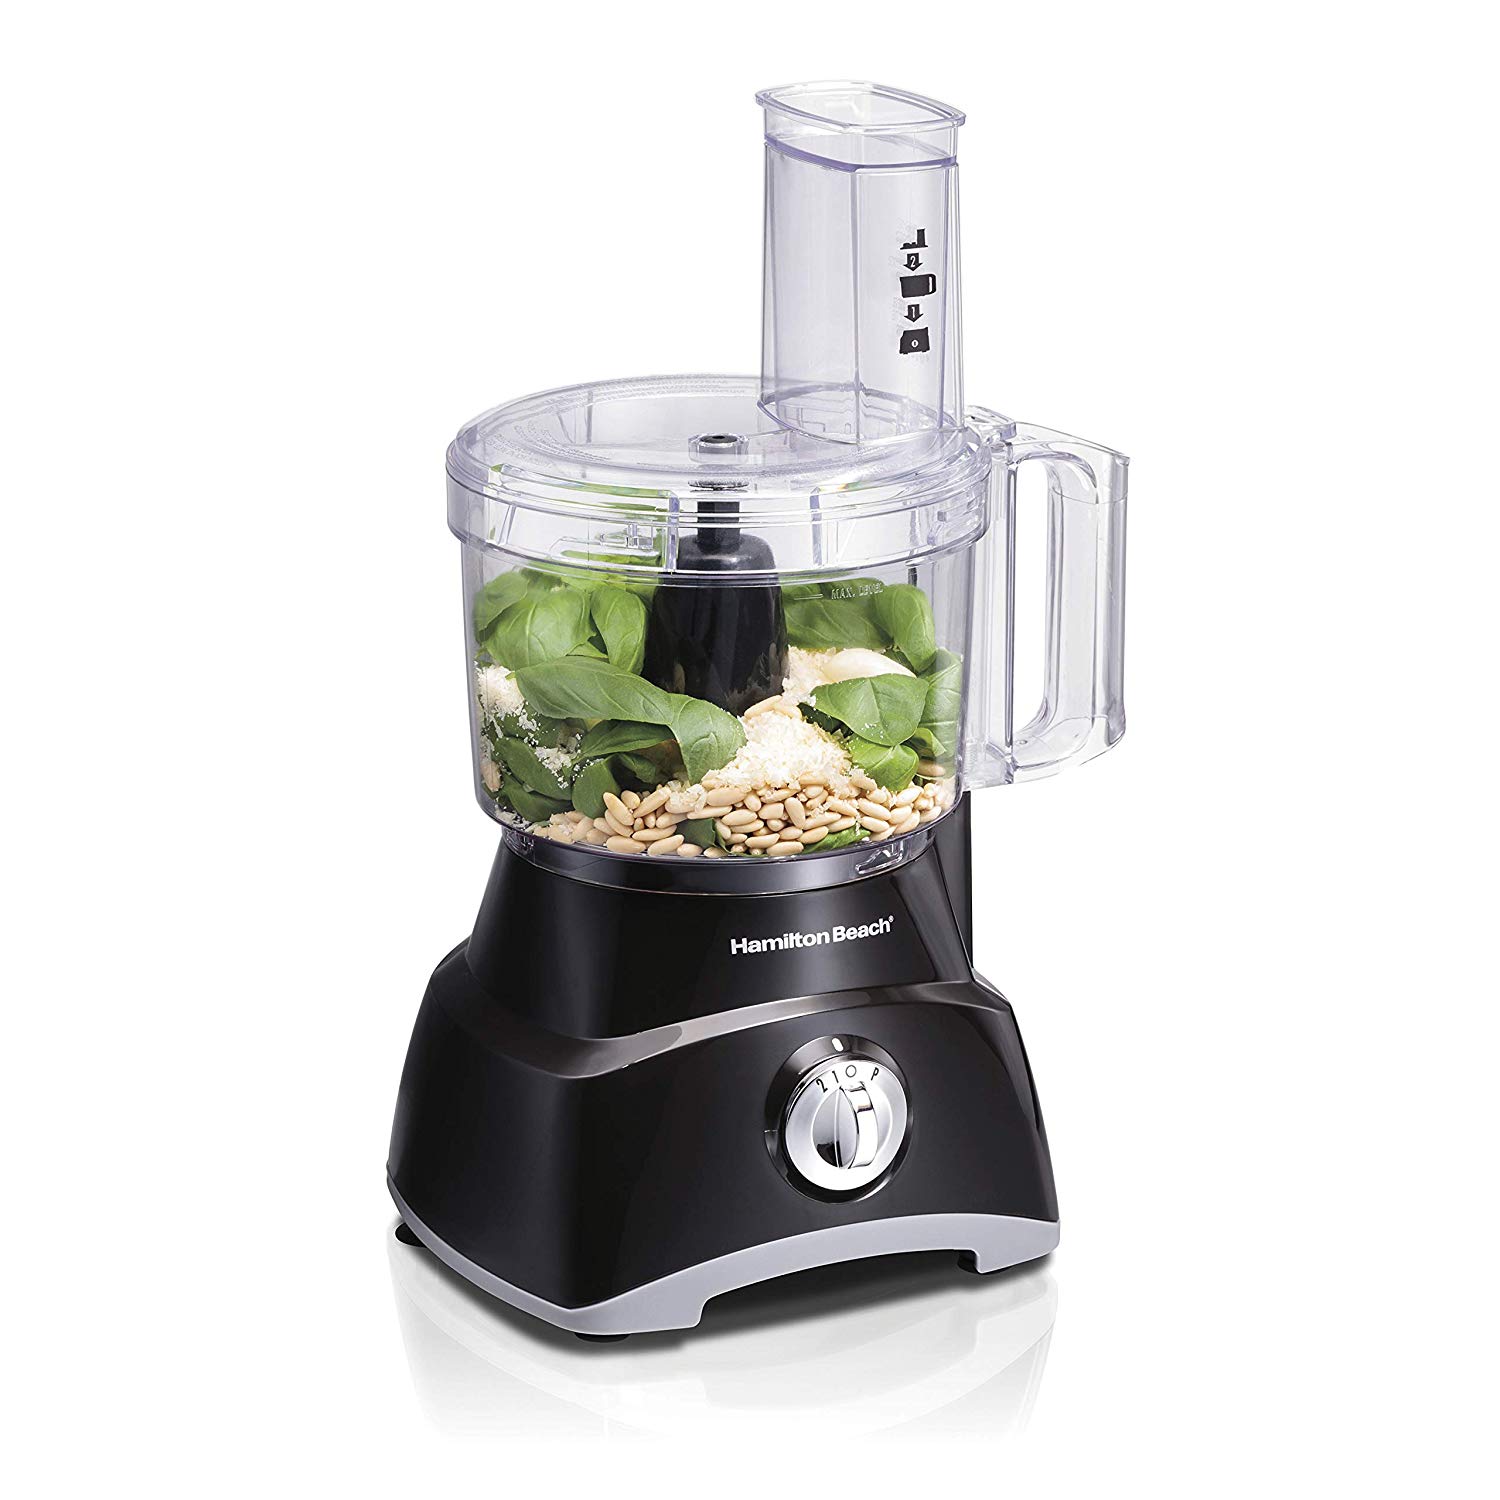 Hamilton Beach 10 Cup Food Processor - Living Free in Tennessee - Podcast